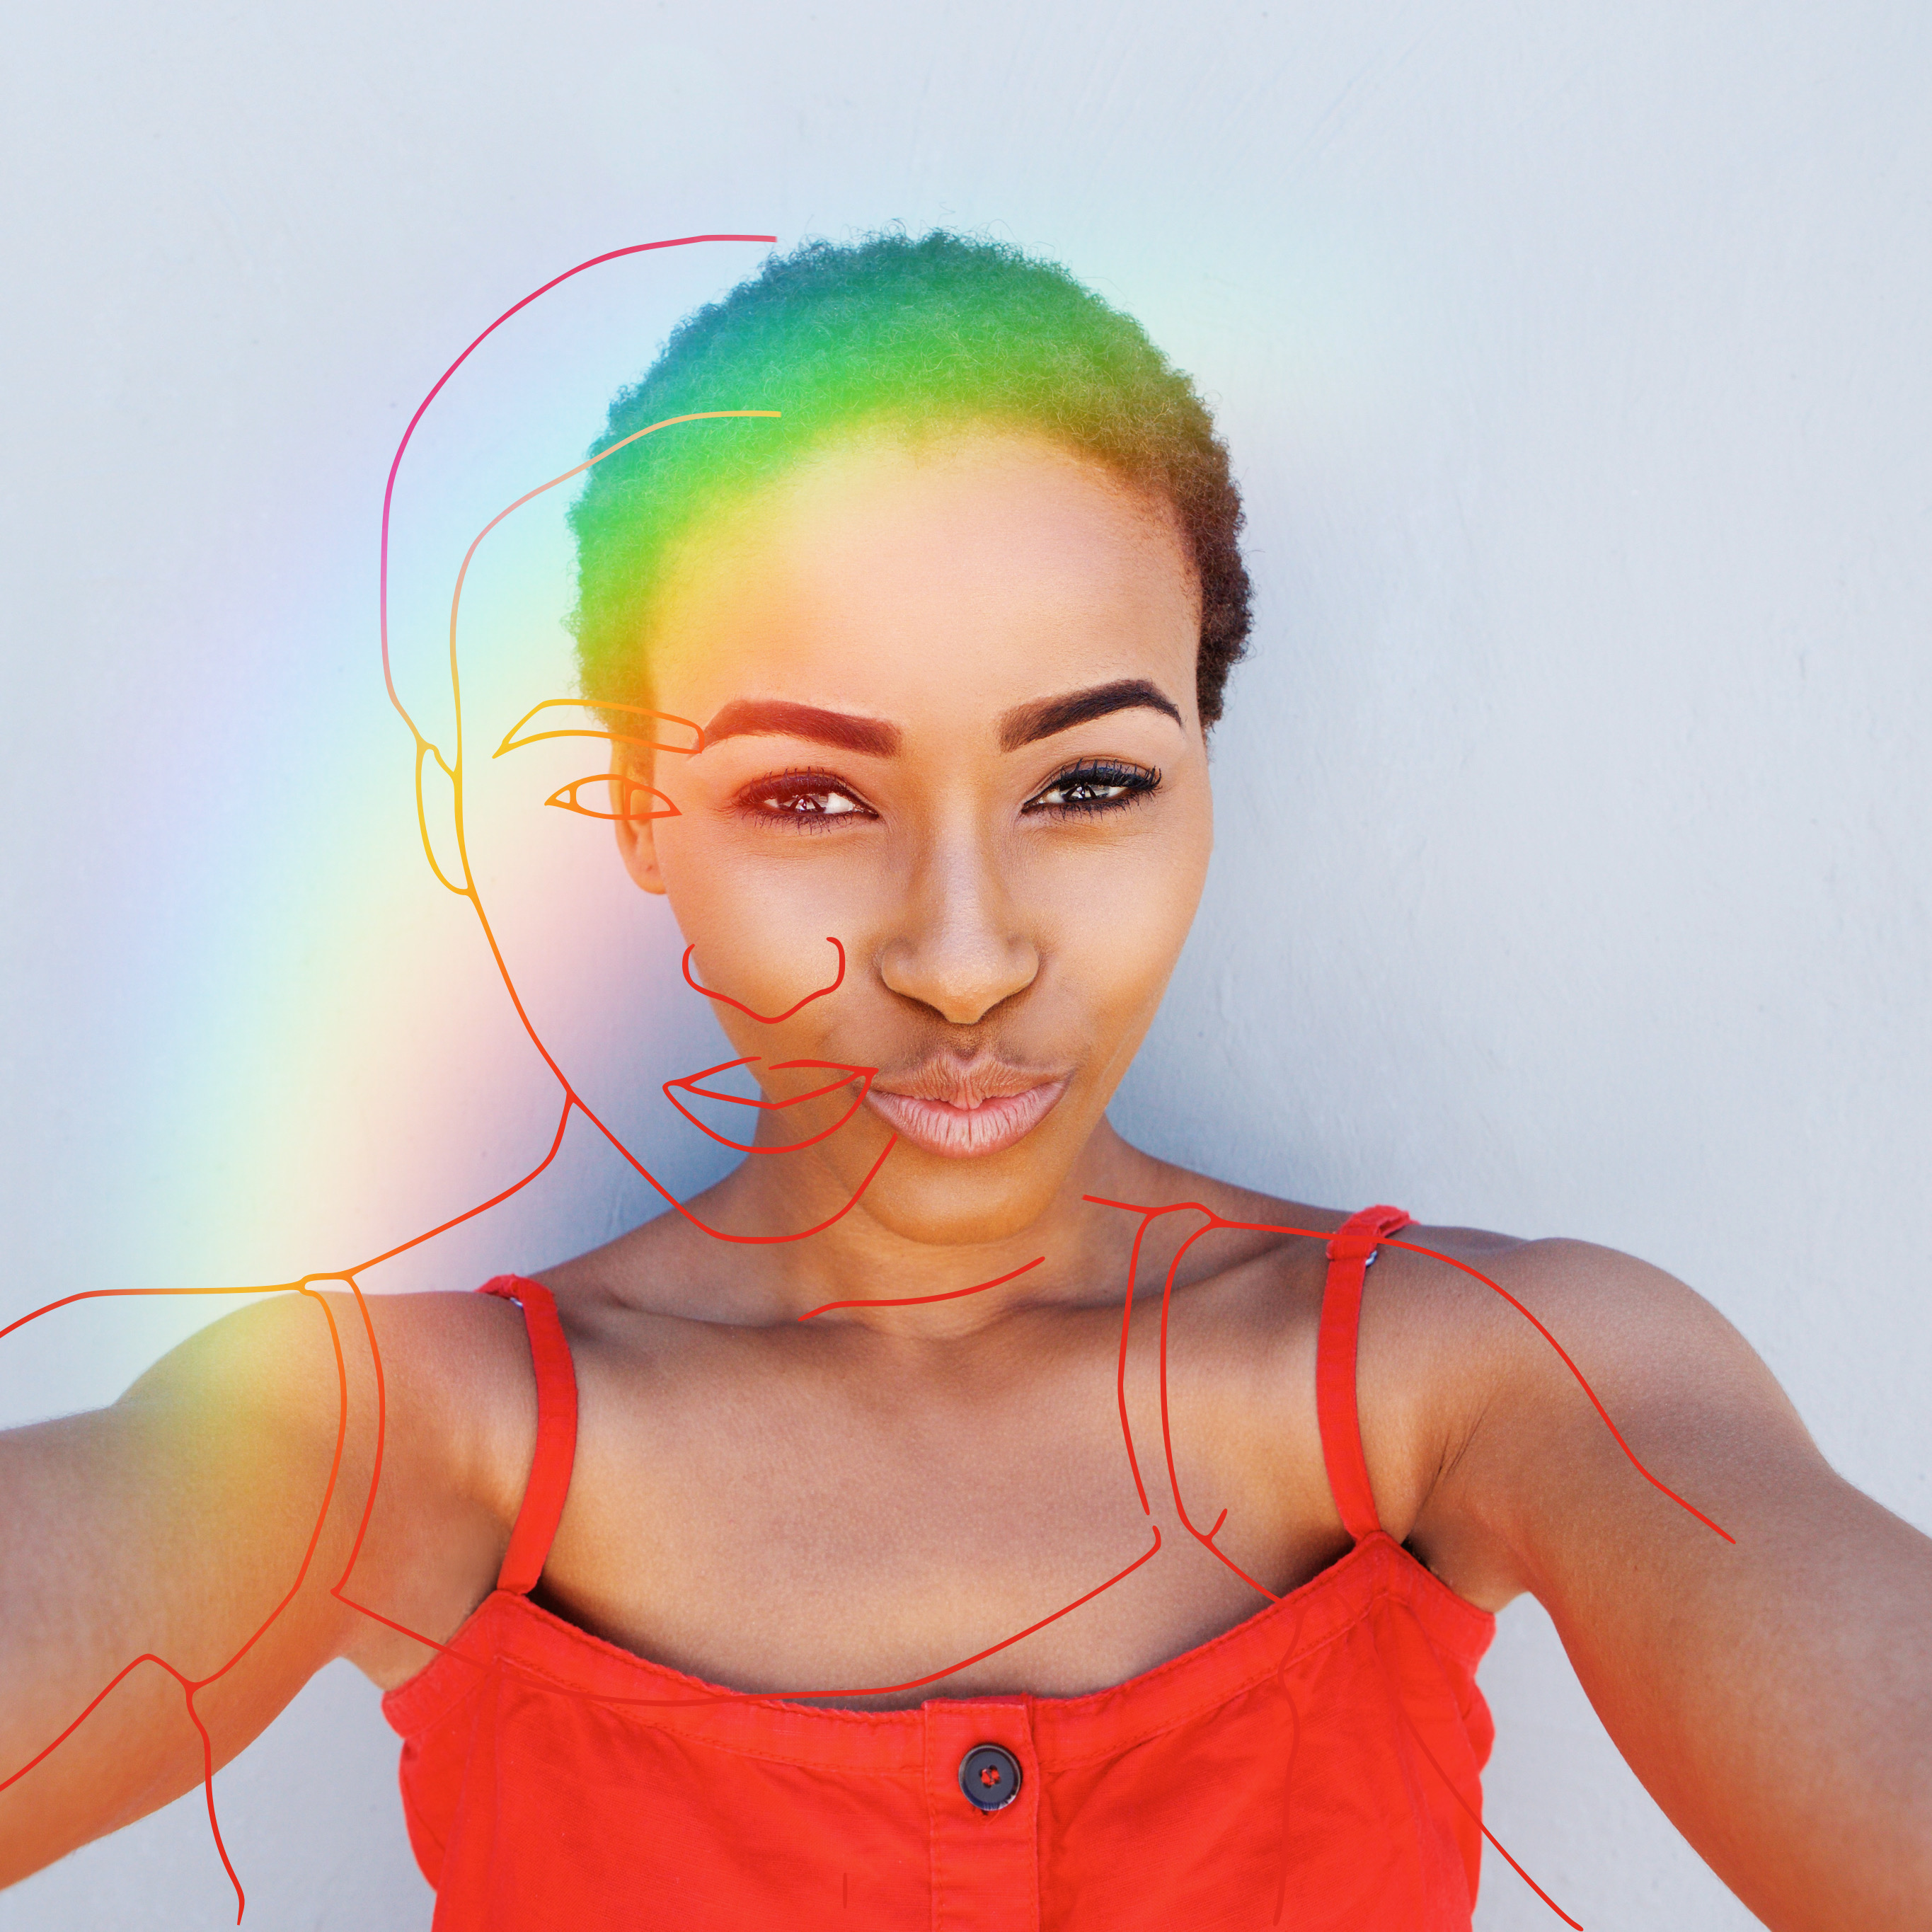 black hair girl selfie with sketch and prism effect